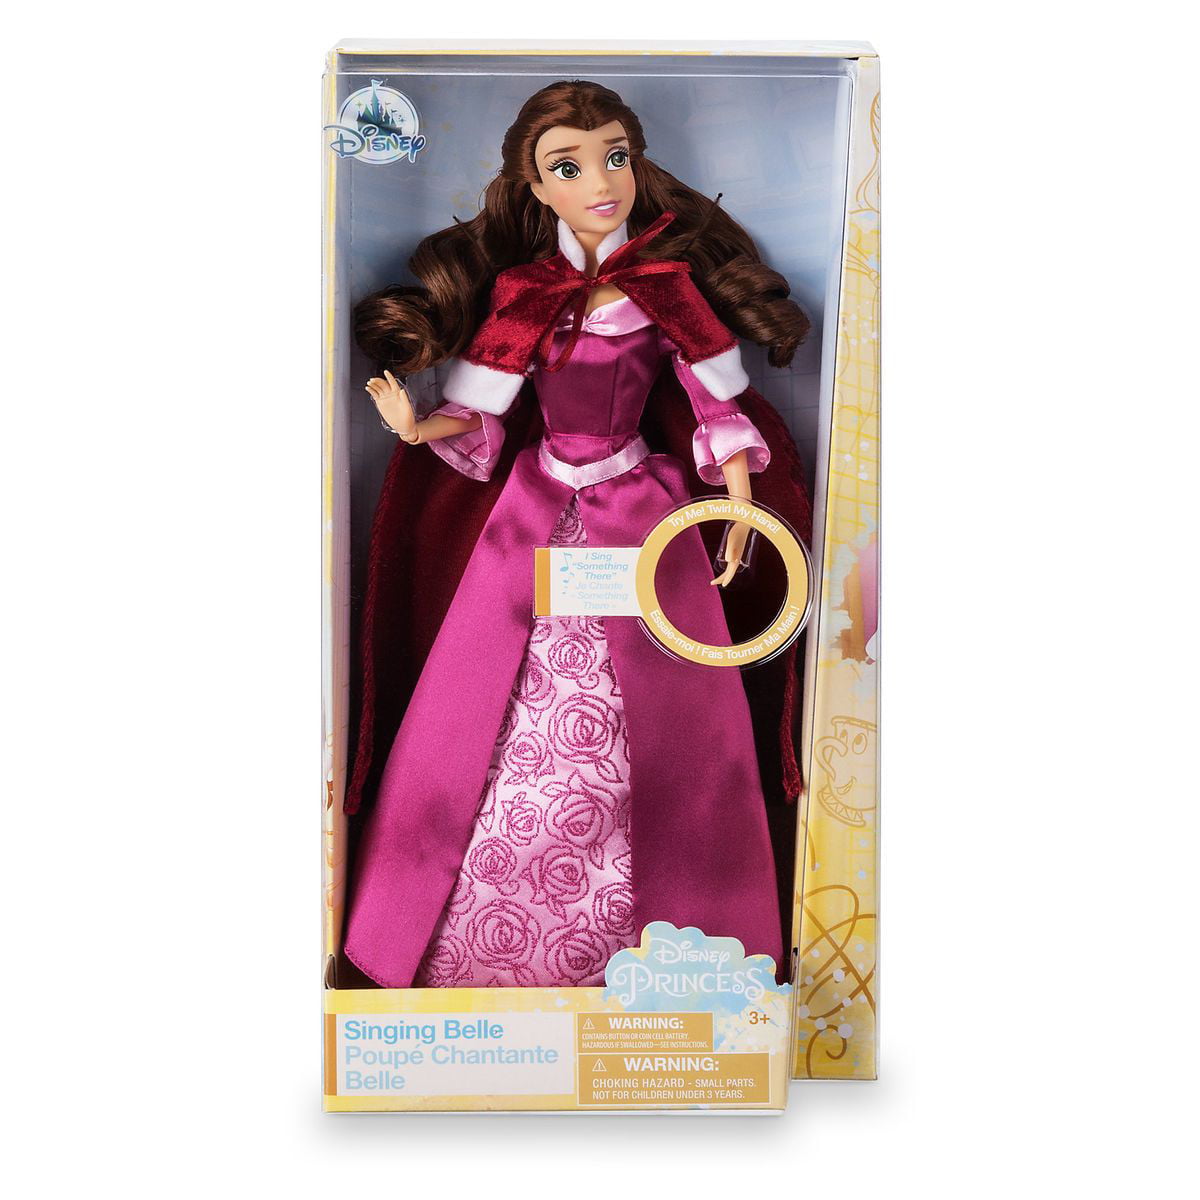 Disney Beauty and the Beast's Belle Singing 11 1/2" Doll brand new in box